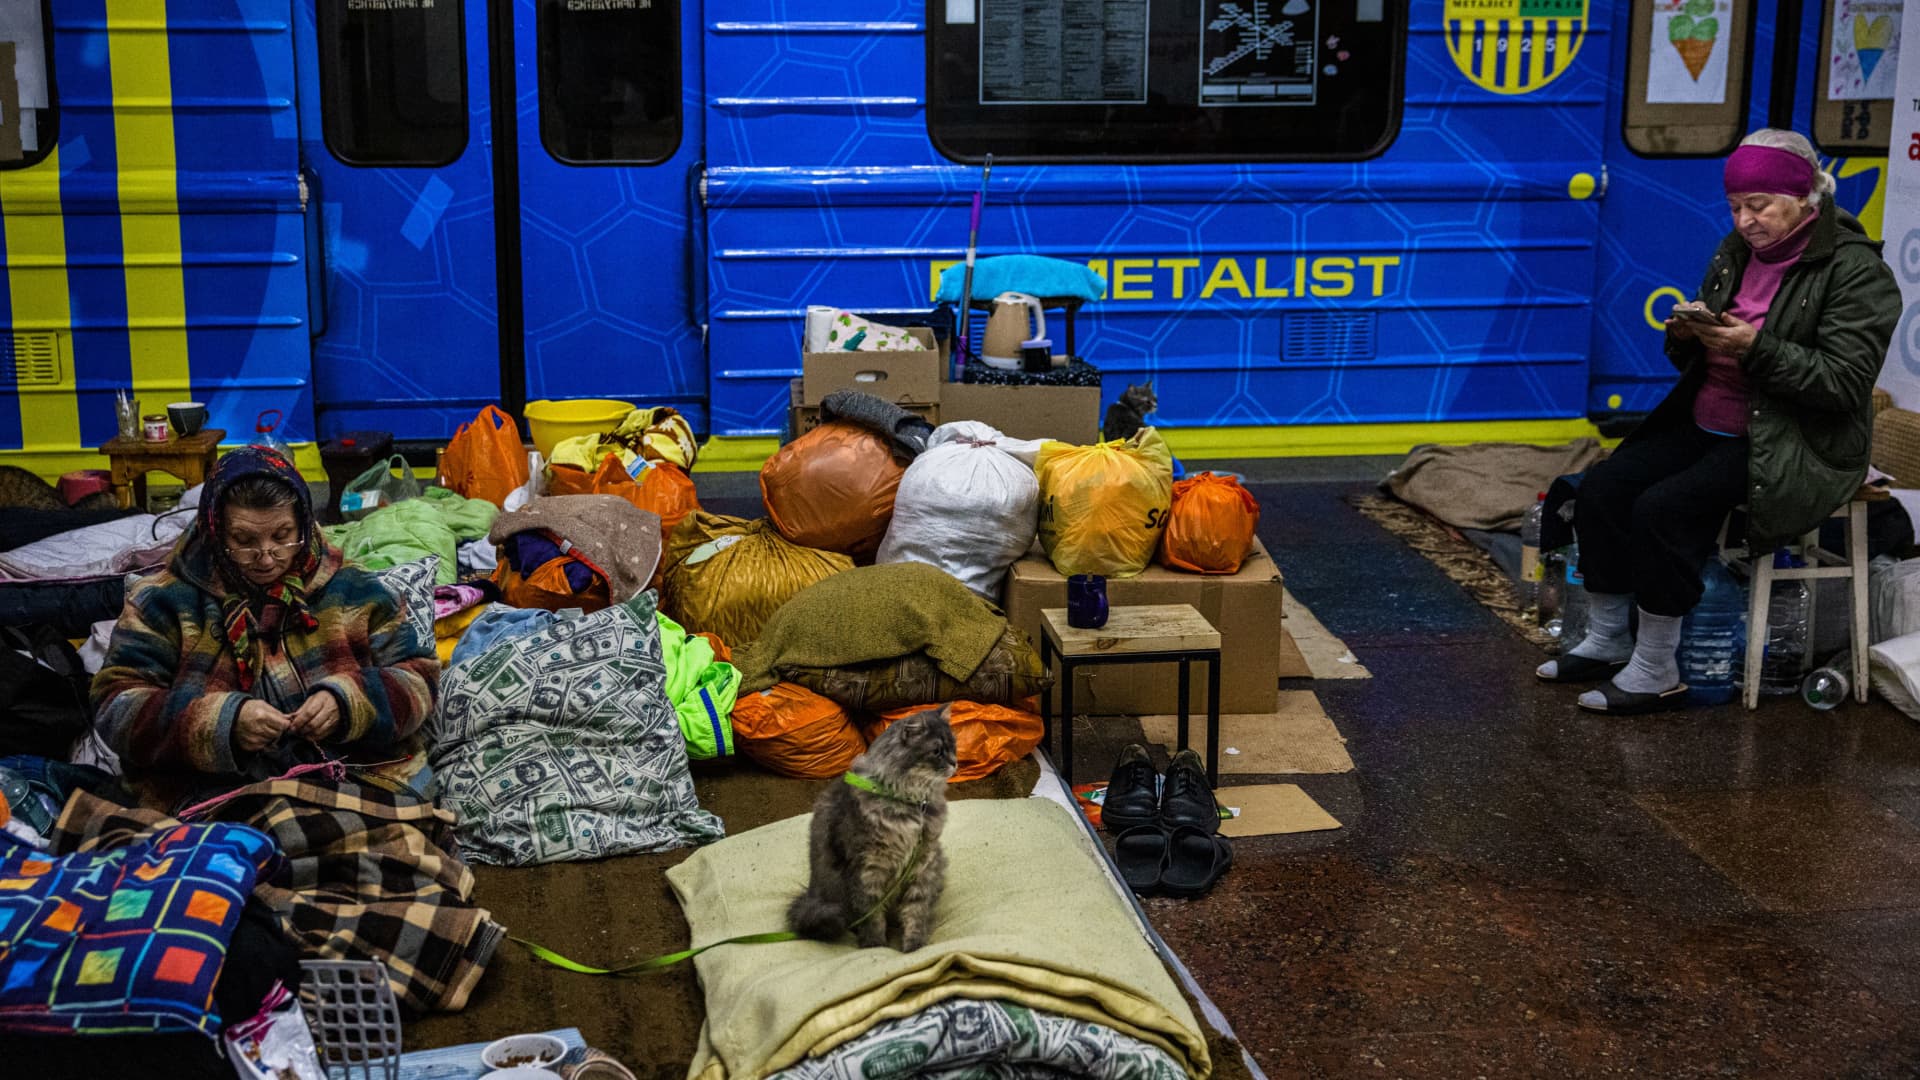 People shelter and live in an underground subway station in the Saltivska district in Kharkiv, eastern Ukraine, on May 19, 2022, on the 85th day of the Russian invasion of Ukraine.